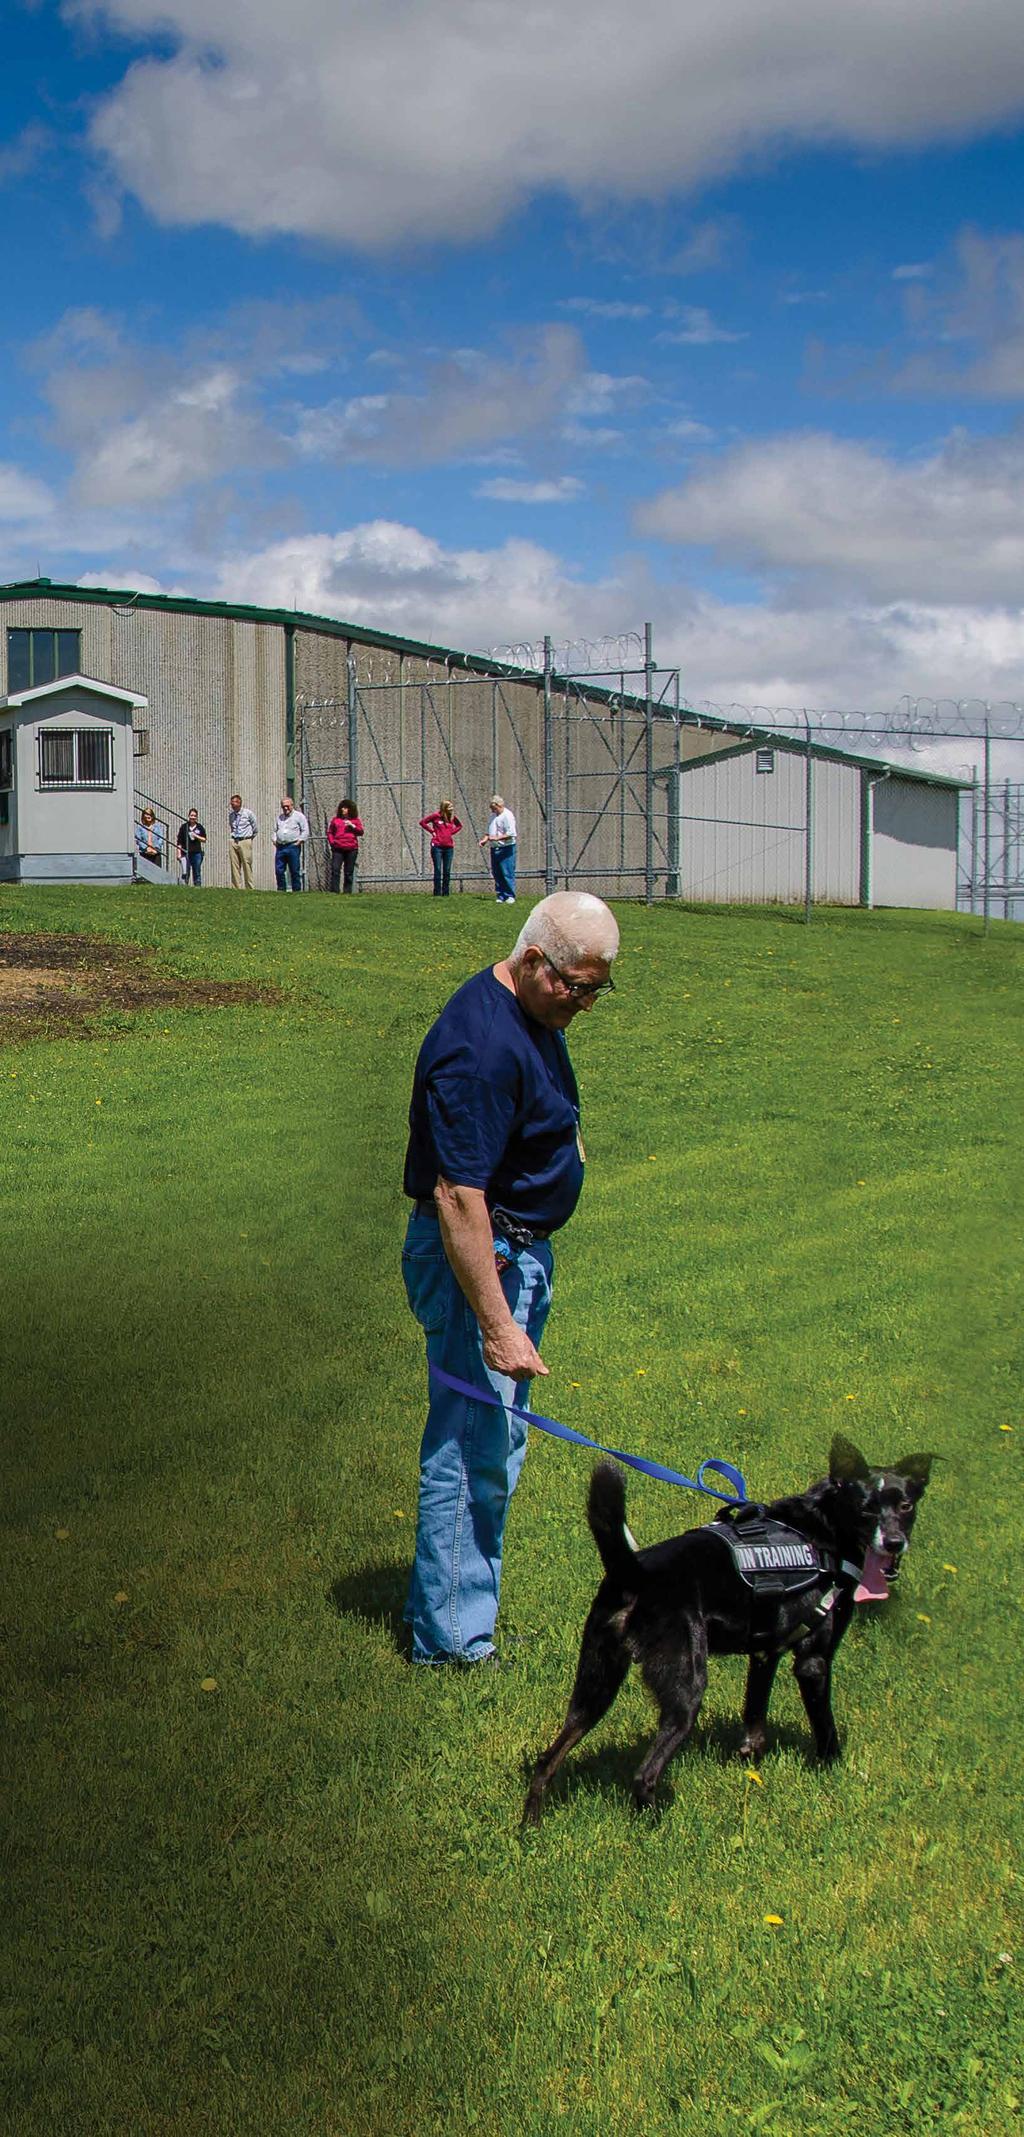 clarinda prison pets for vets GRADUATED DOGS: 36 315 TOTAL 114 DOGS 138 CATS 29 SMALL ANIMALS 34 BARN ANIMALS Jace was very sweet outside of his kennel, but when he was inside he would lunge and